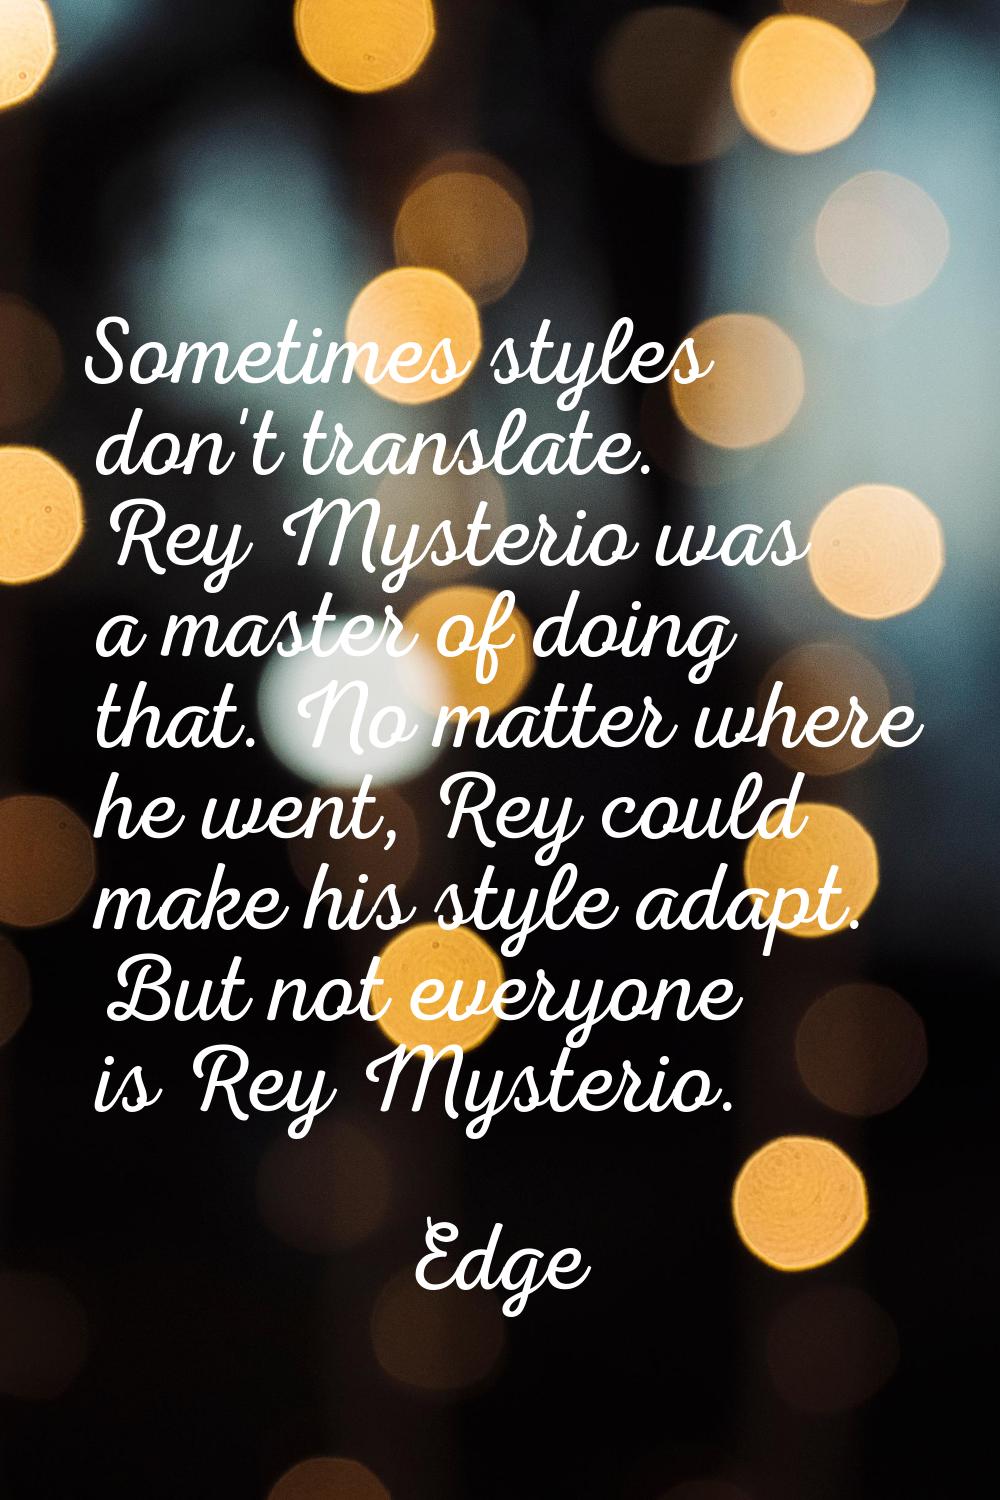 Sometimes styles don't translate. Rey Mysterio was a master of doing that. No matter where he went,